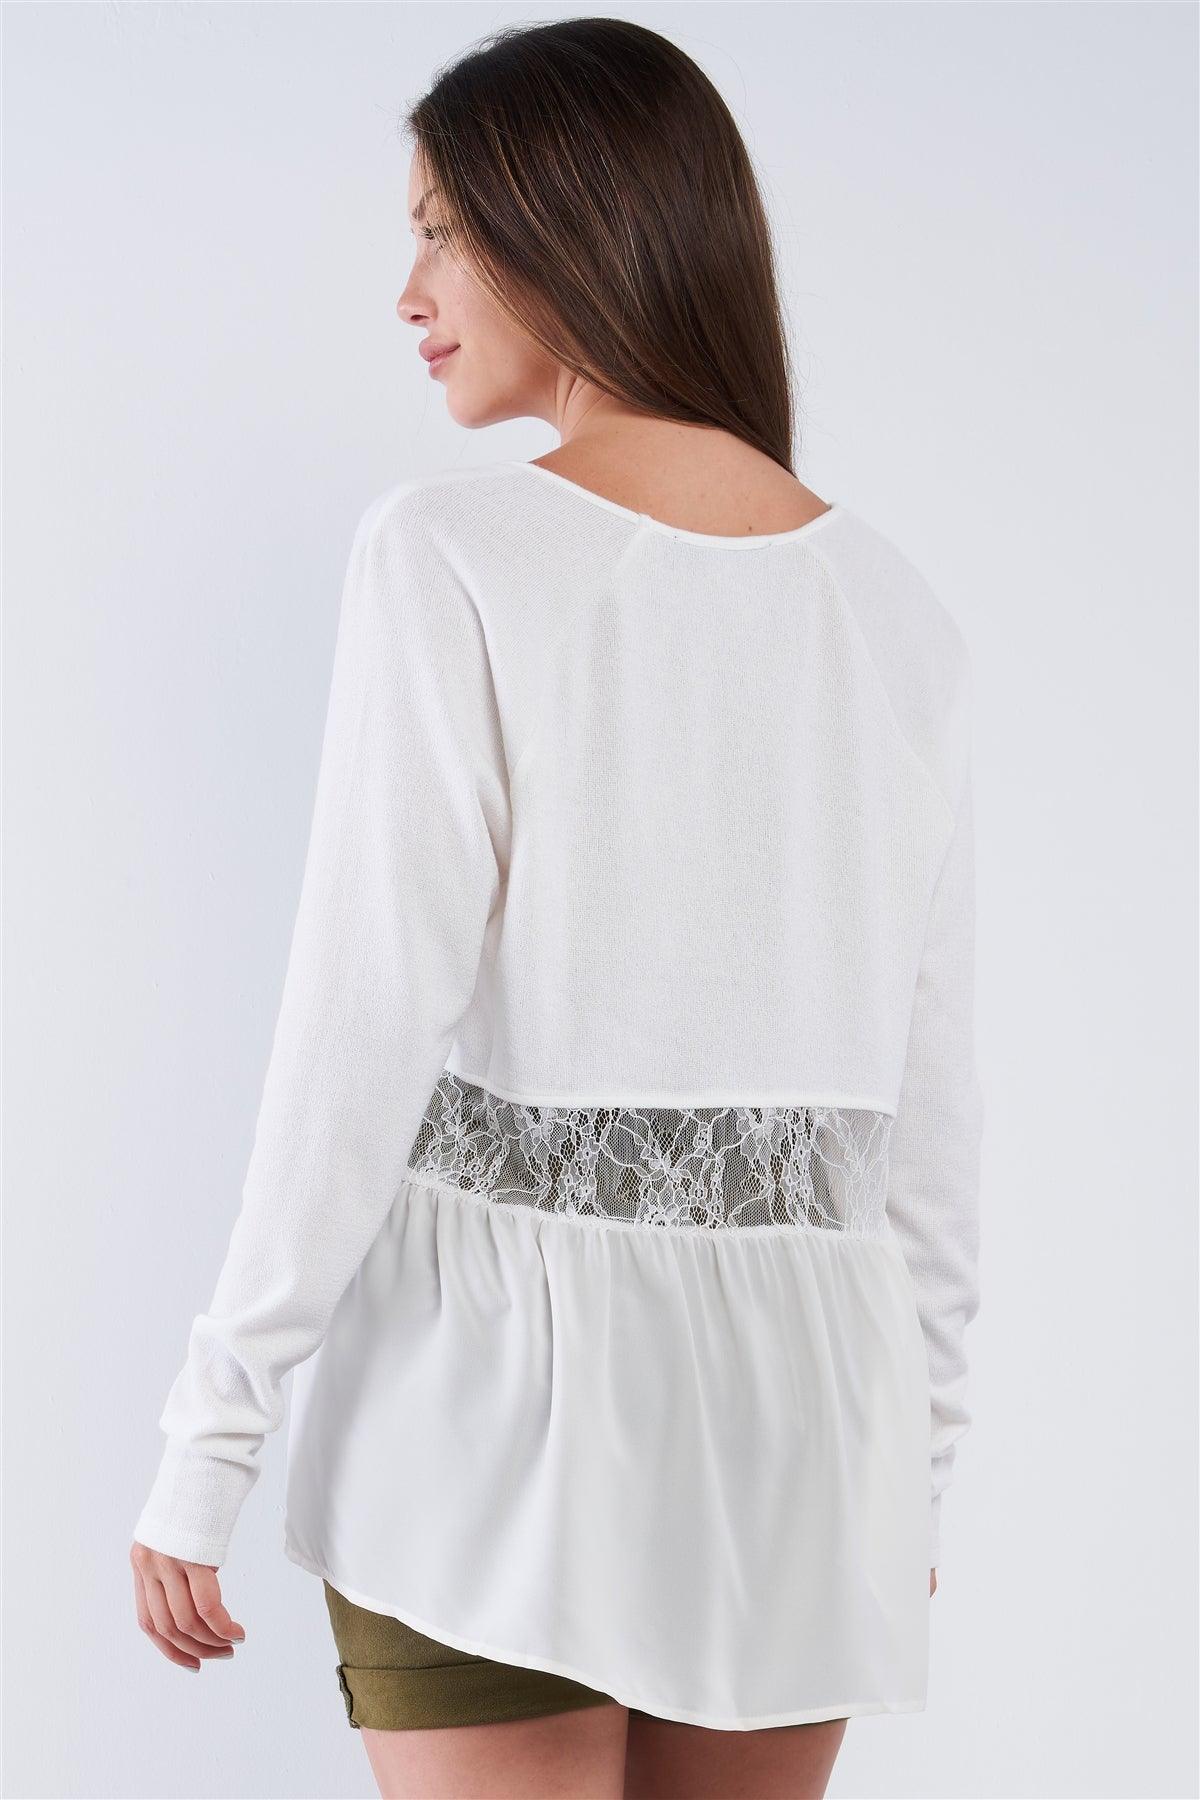 Off-White Loose Fit Long Sleeve V-Neck Mesh Detail Tunic Pullover Top /1-2-2-1